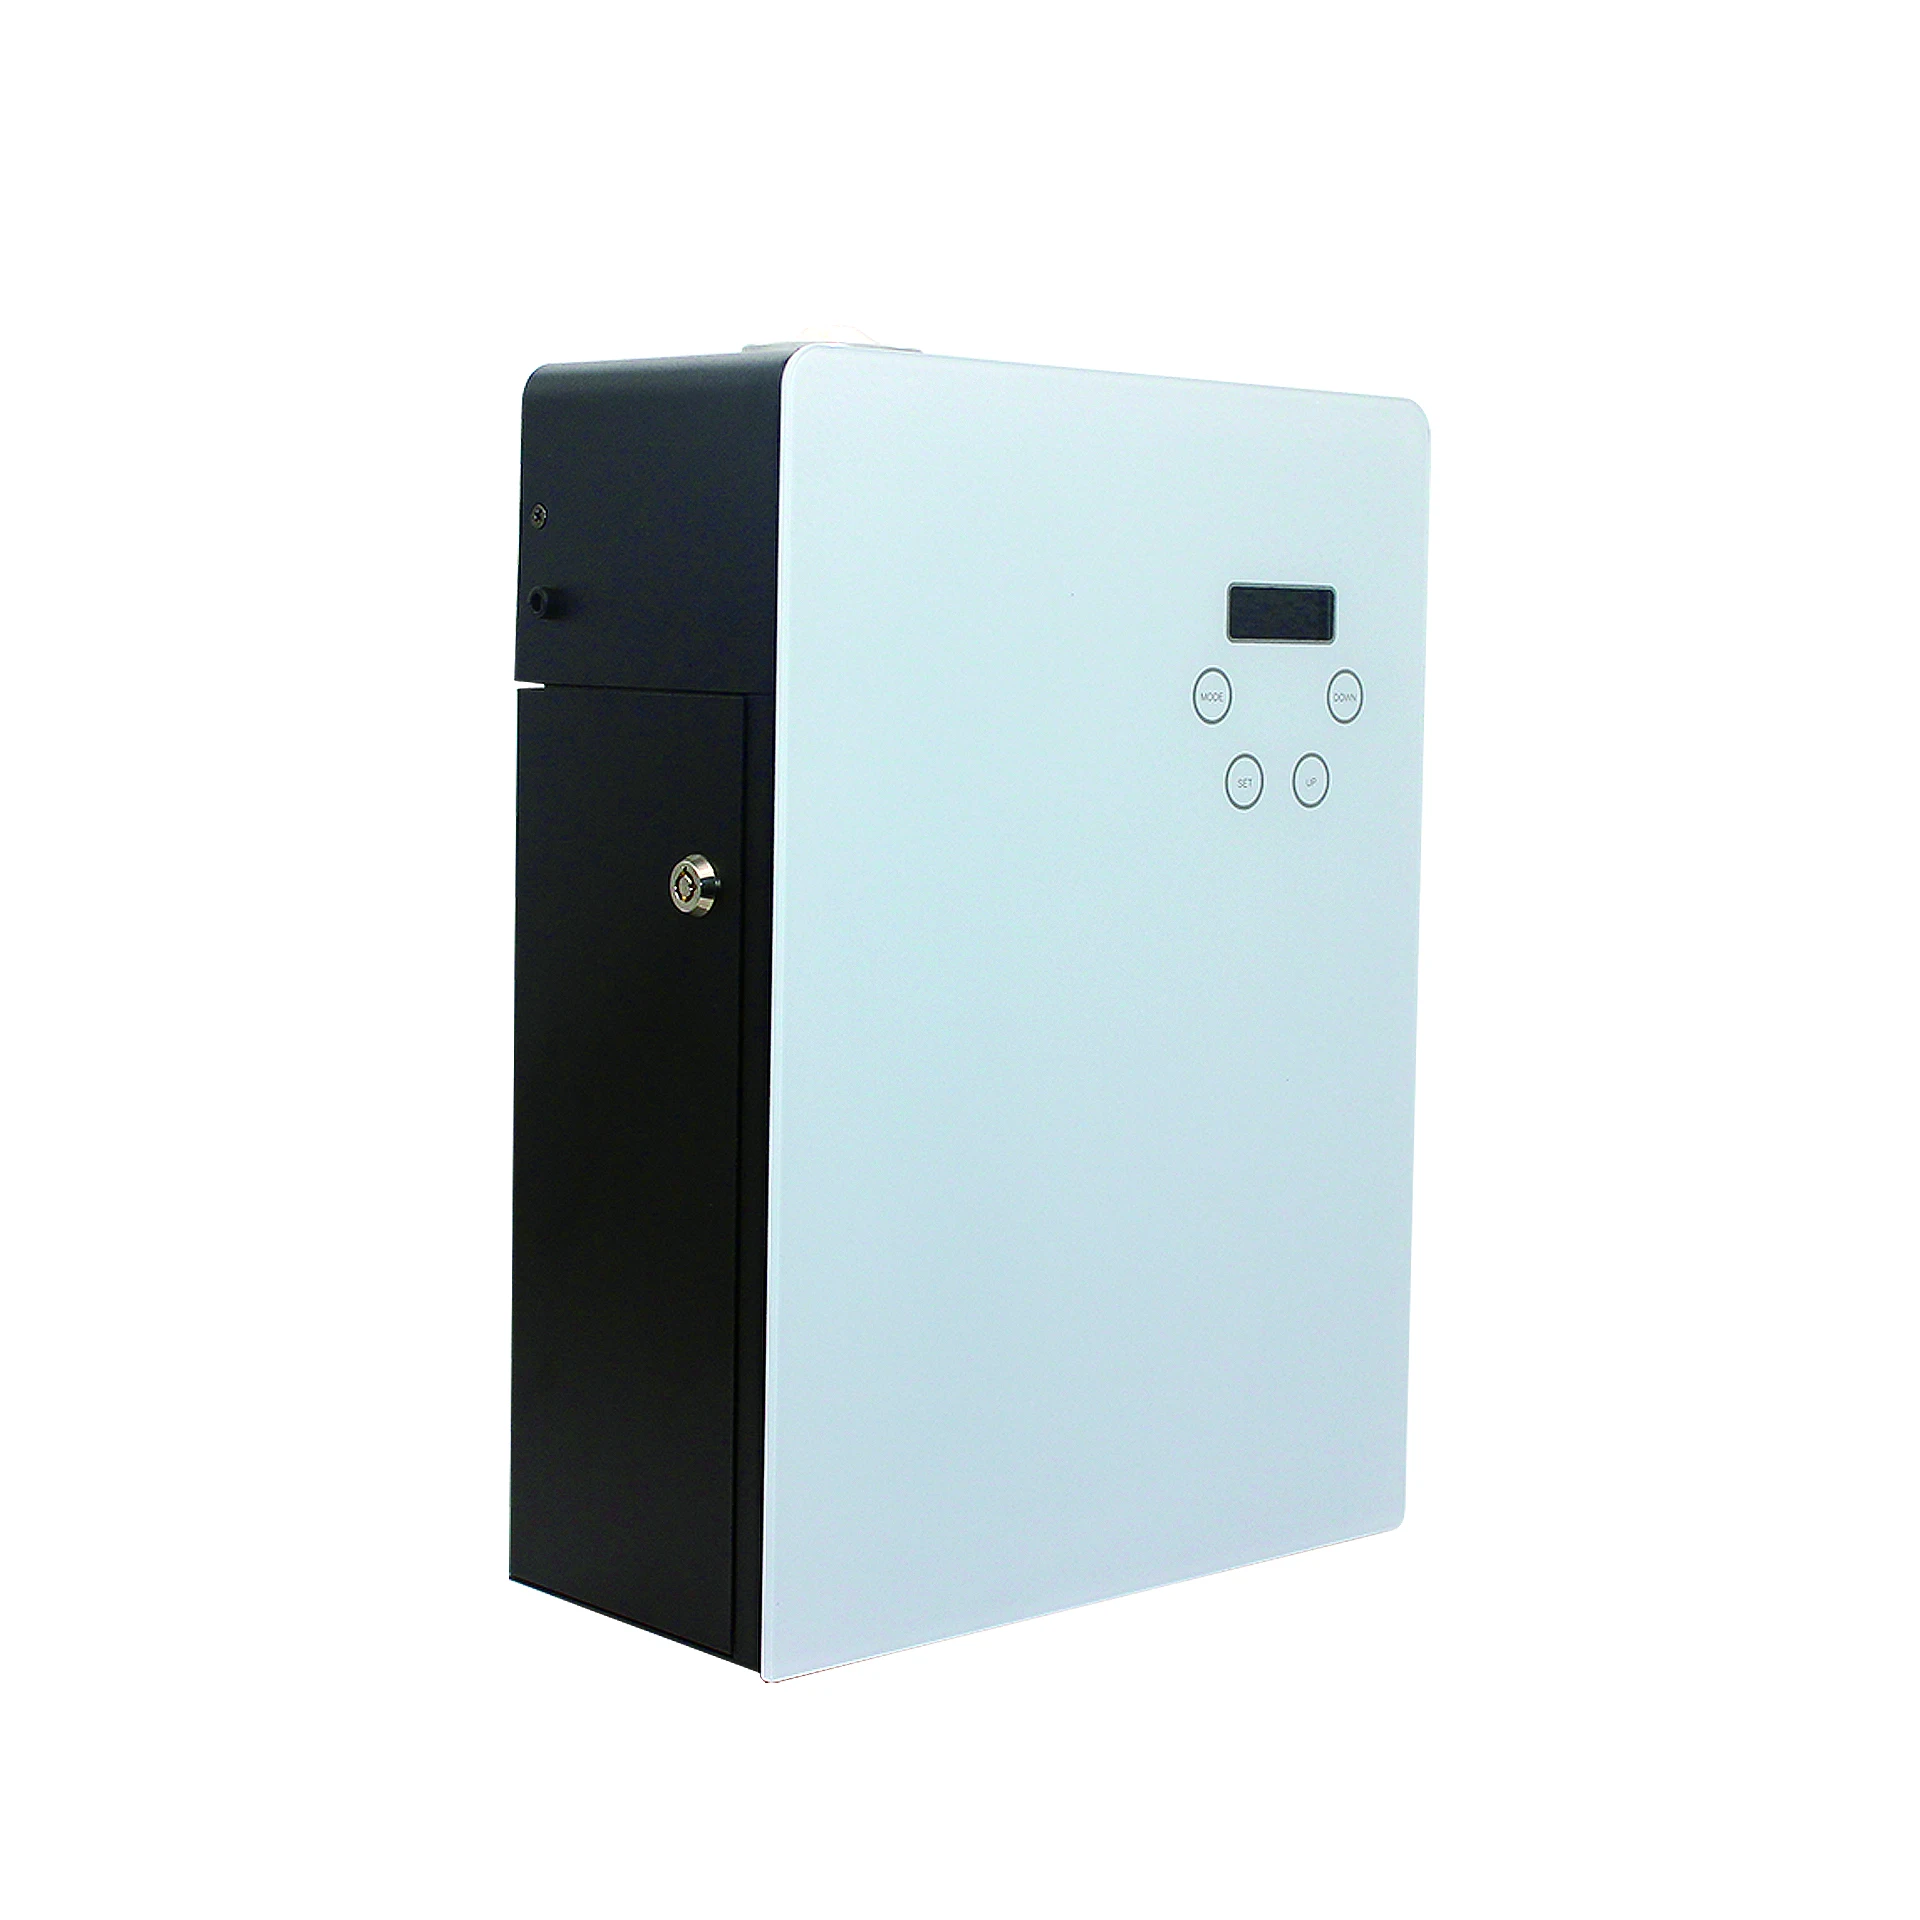 Commercial Scent Diffuser Nebulizer Connect to HVAC system,Professional Aroma Essential Oil Diffusion Machine